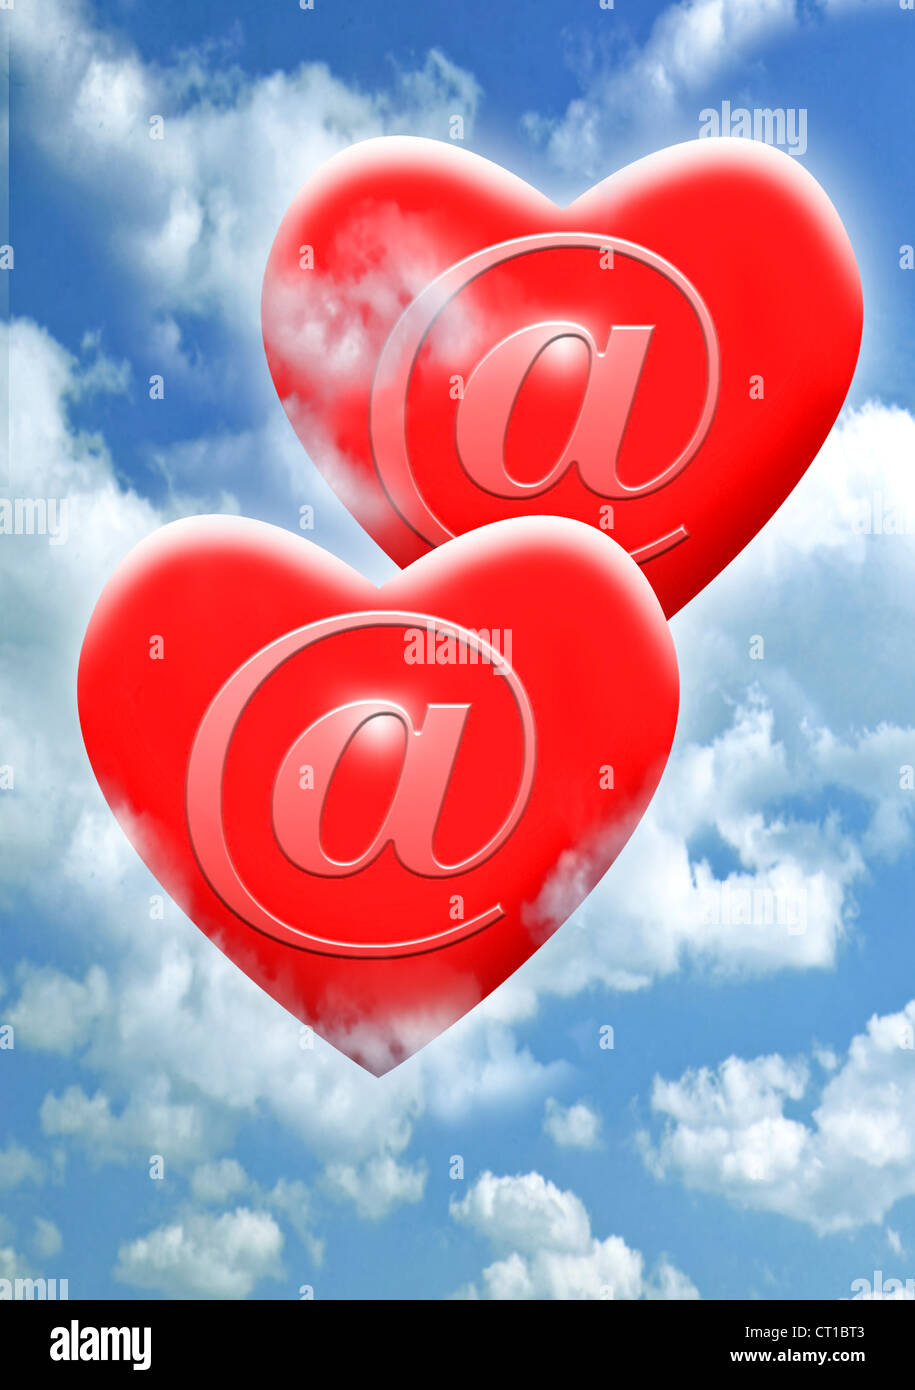 Two red hearts with @ sign on them - online dating Stock Photo